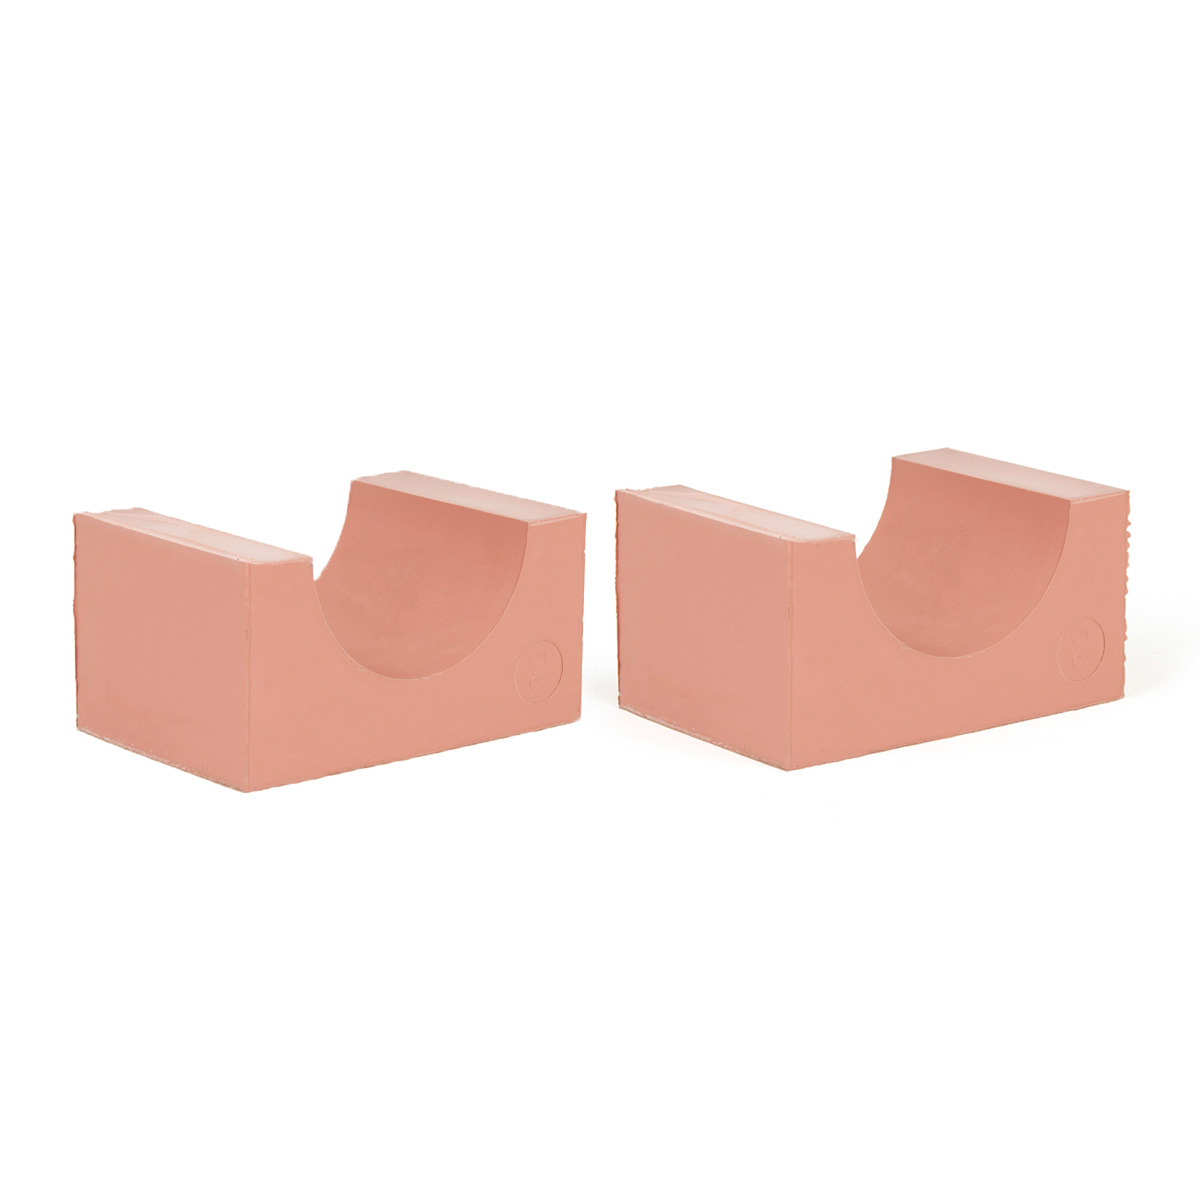 90-58*2 Set of 2 half insert block lycron, 90-58 for cable/pipe diam. 57.5-59.5mm